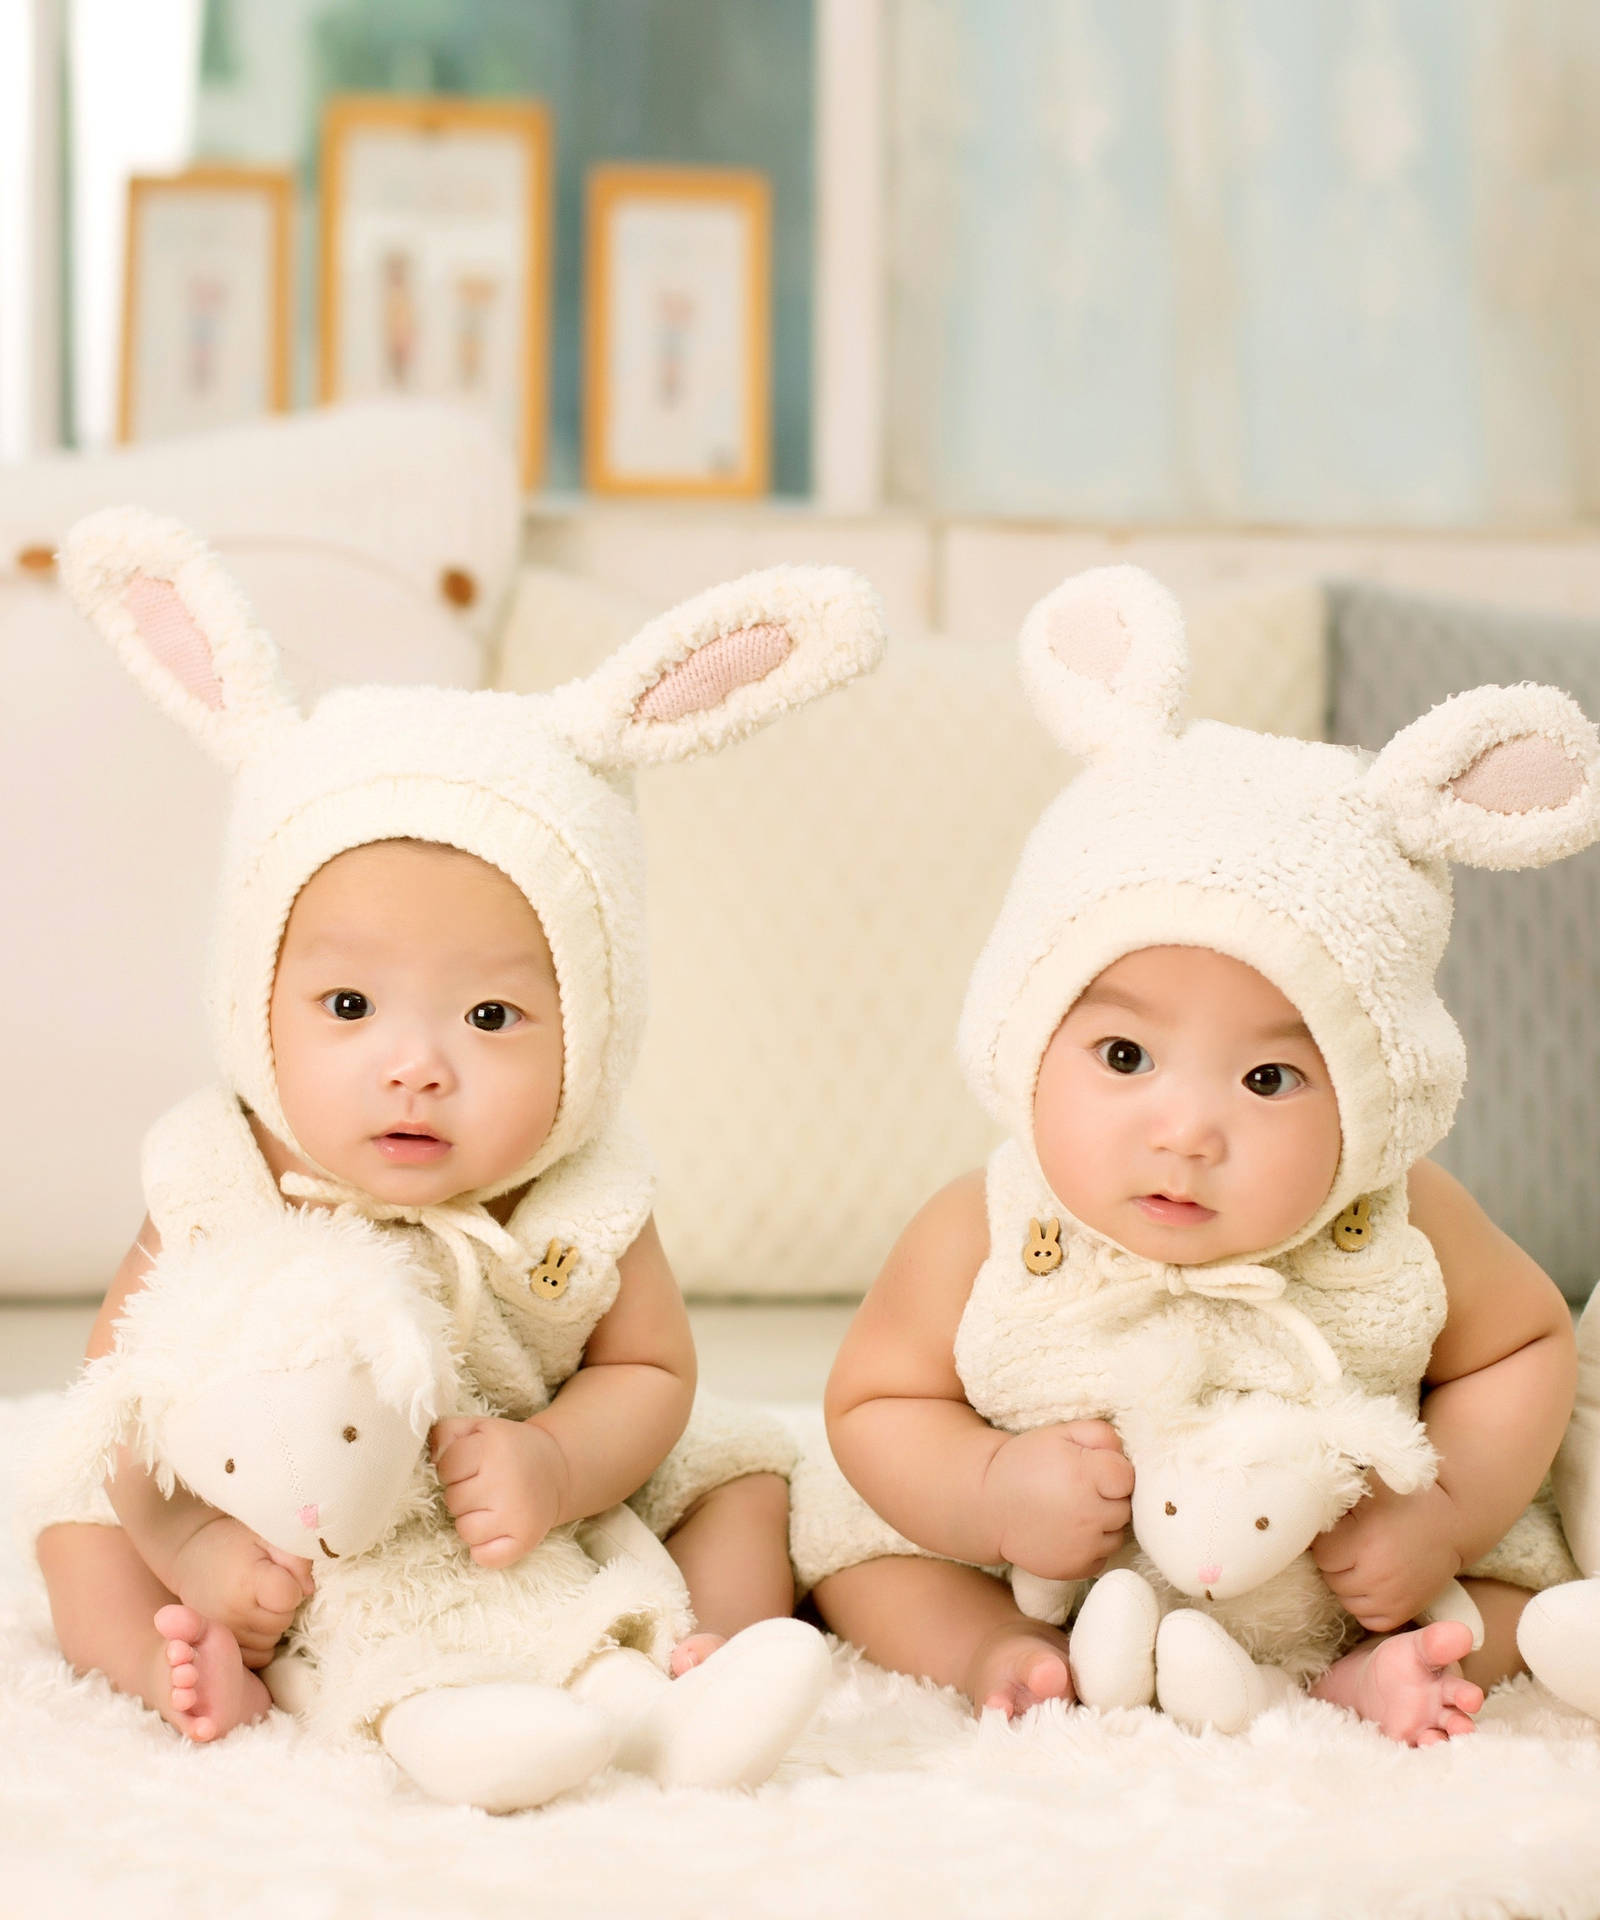 Adorably Cute Babies In Bunny Bonnets